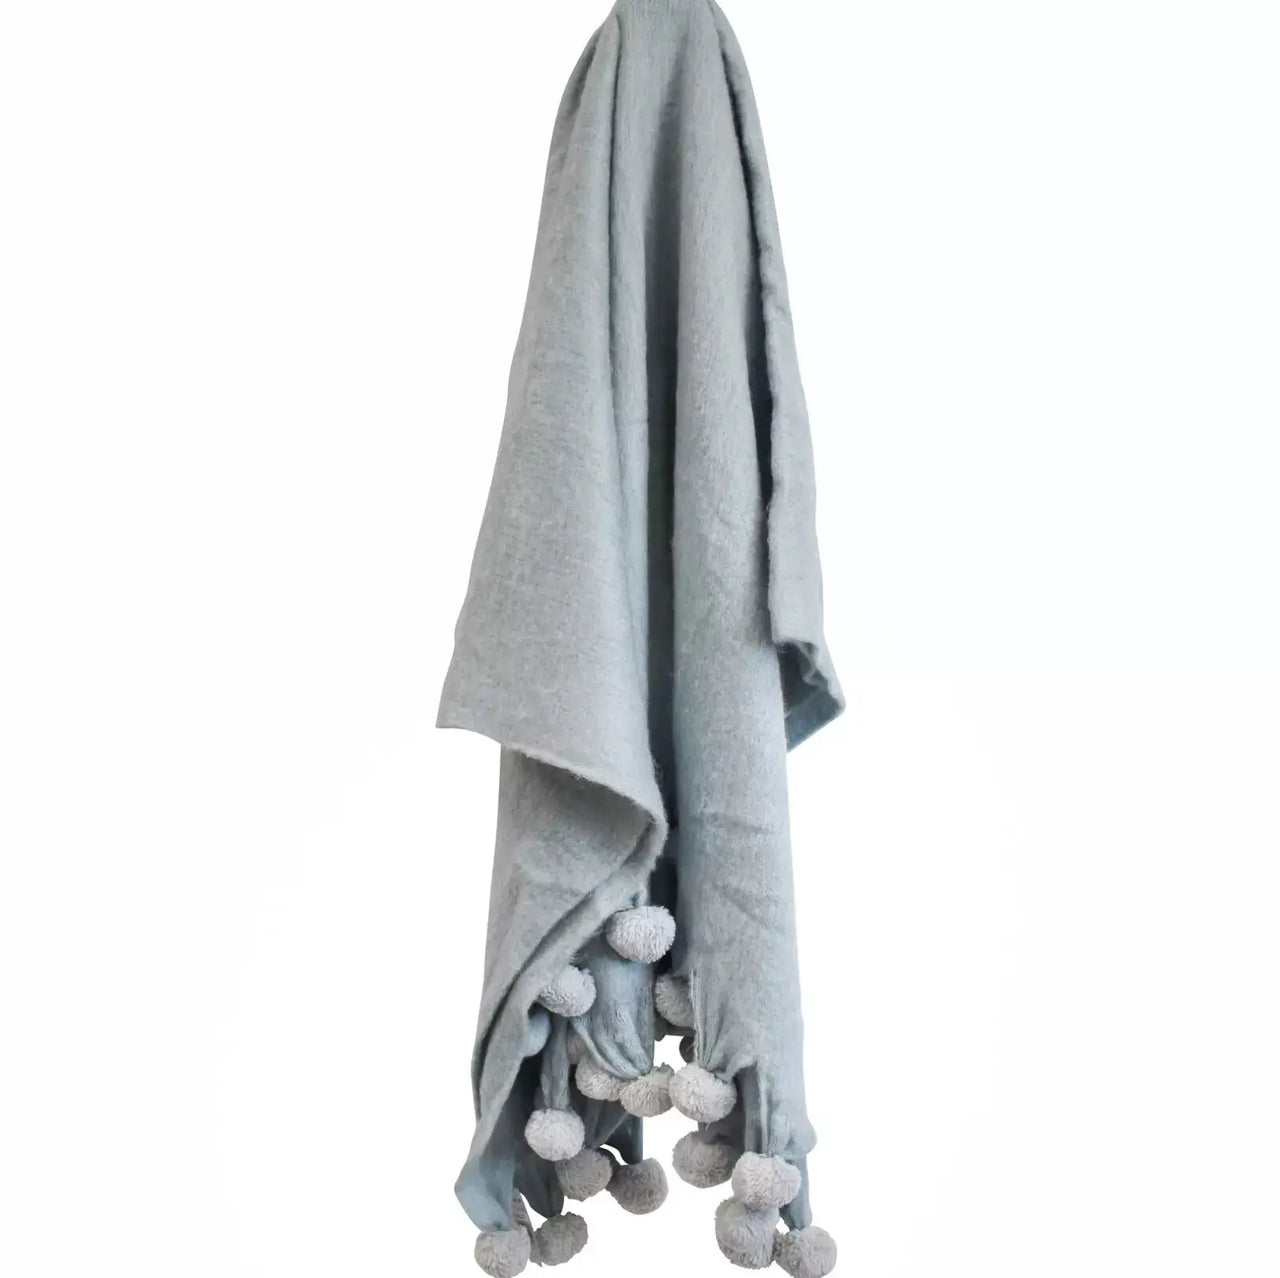 A LaVida Prussian Throw Rug with grey pom poms hanging on a hanger.